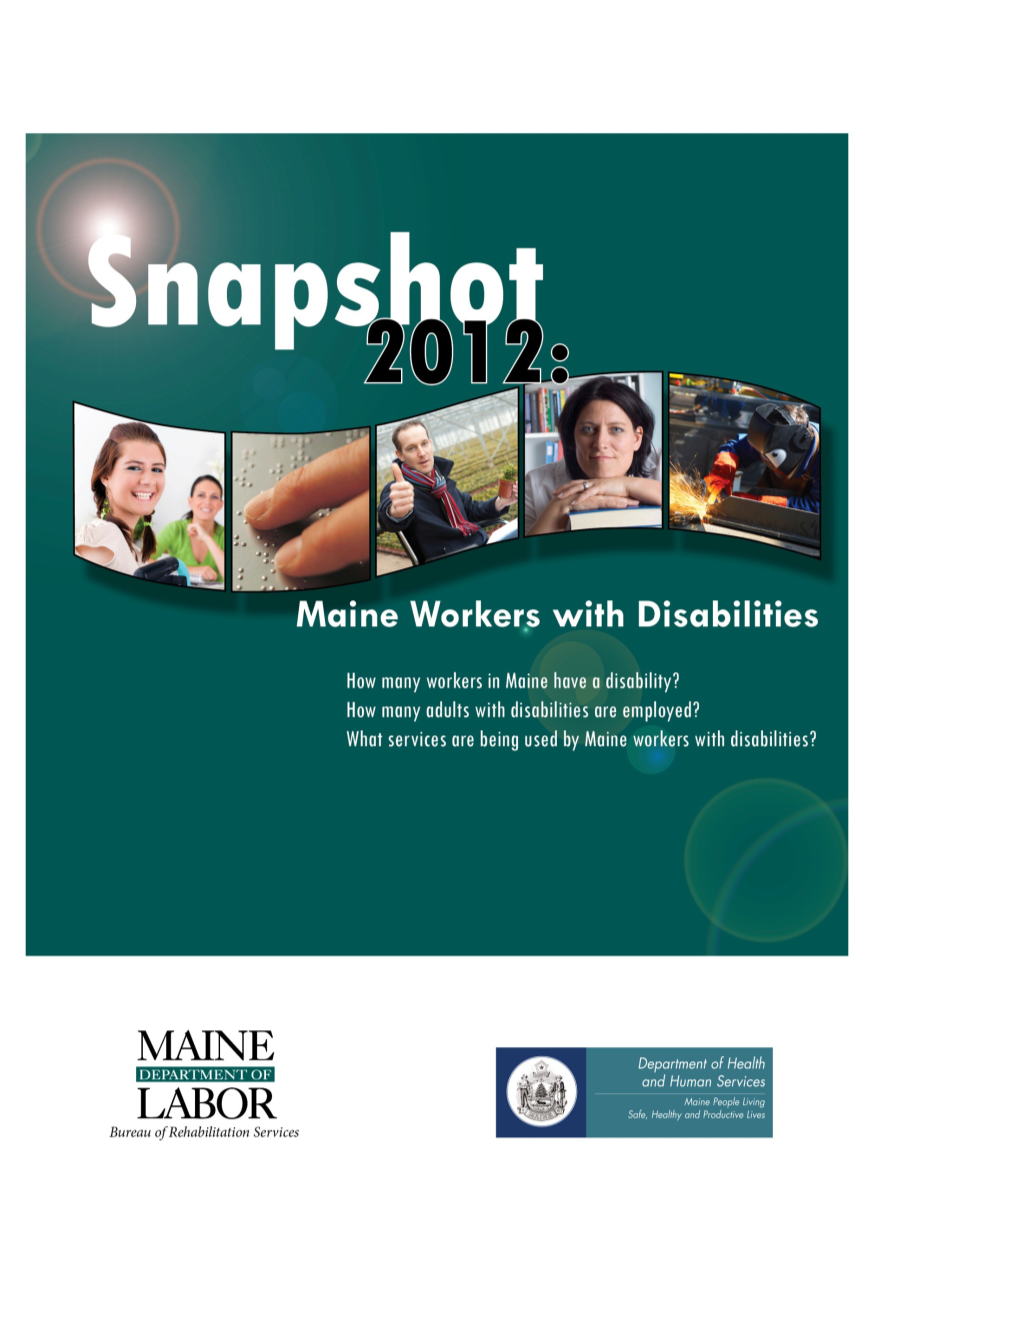 Snapshot 2012: Maine Workers with Disabilities